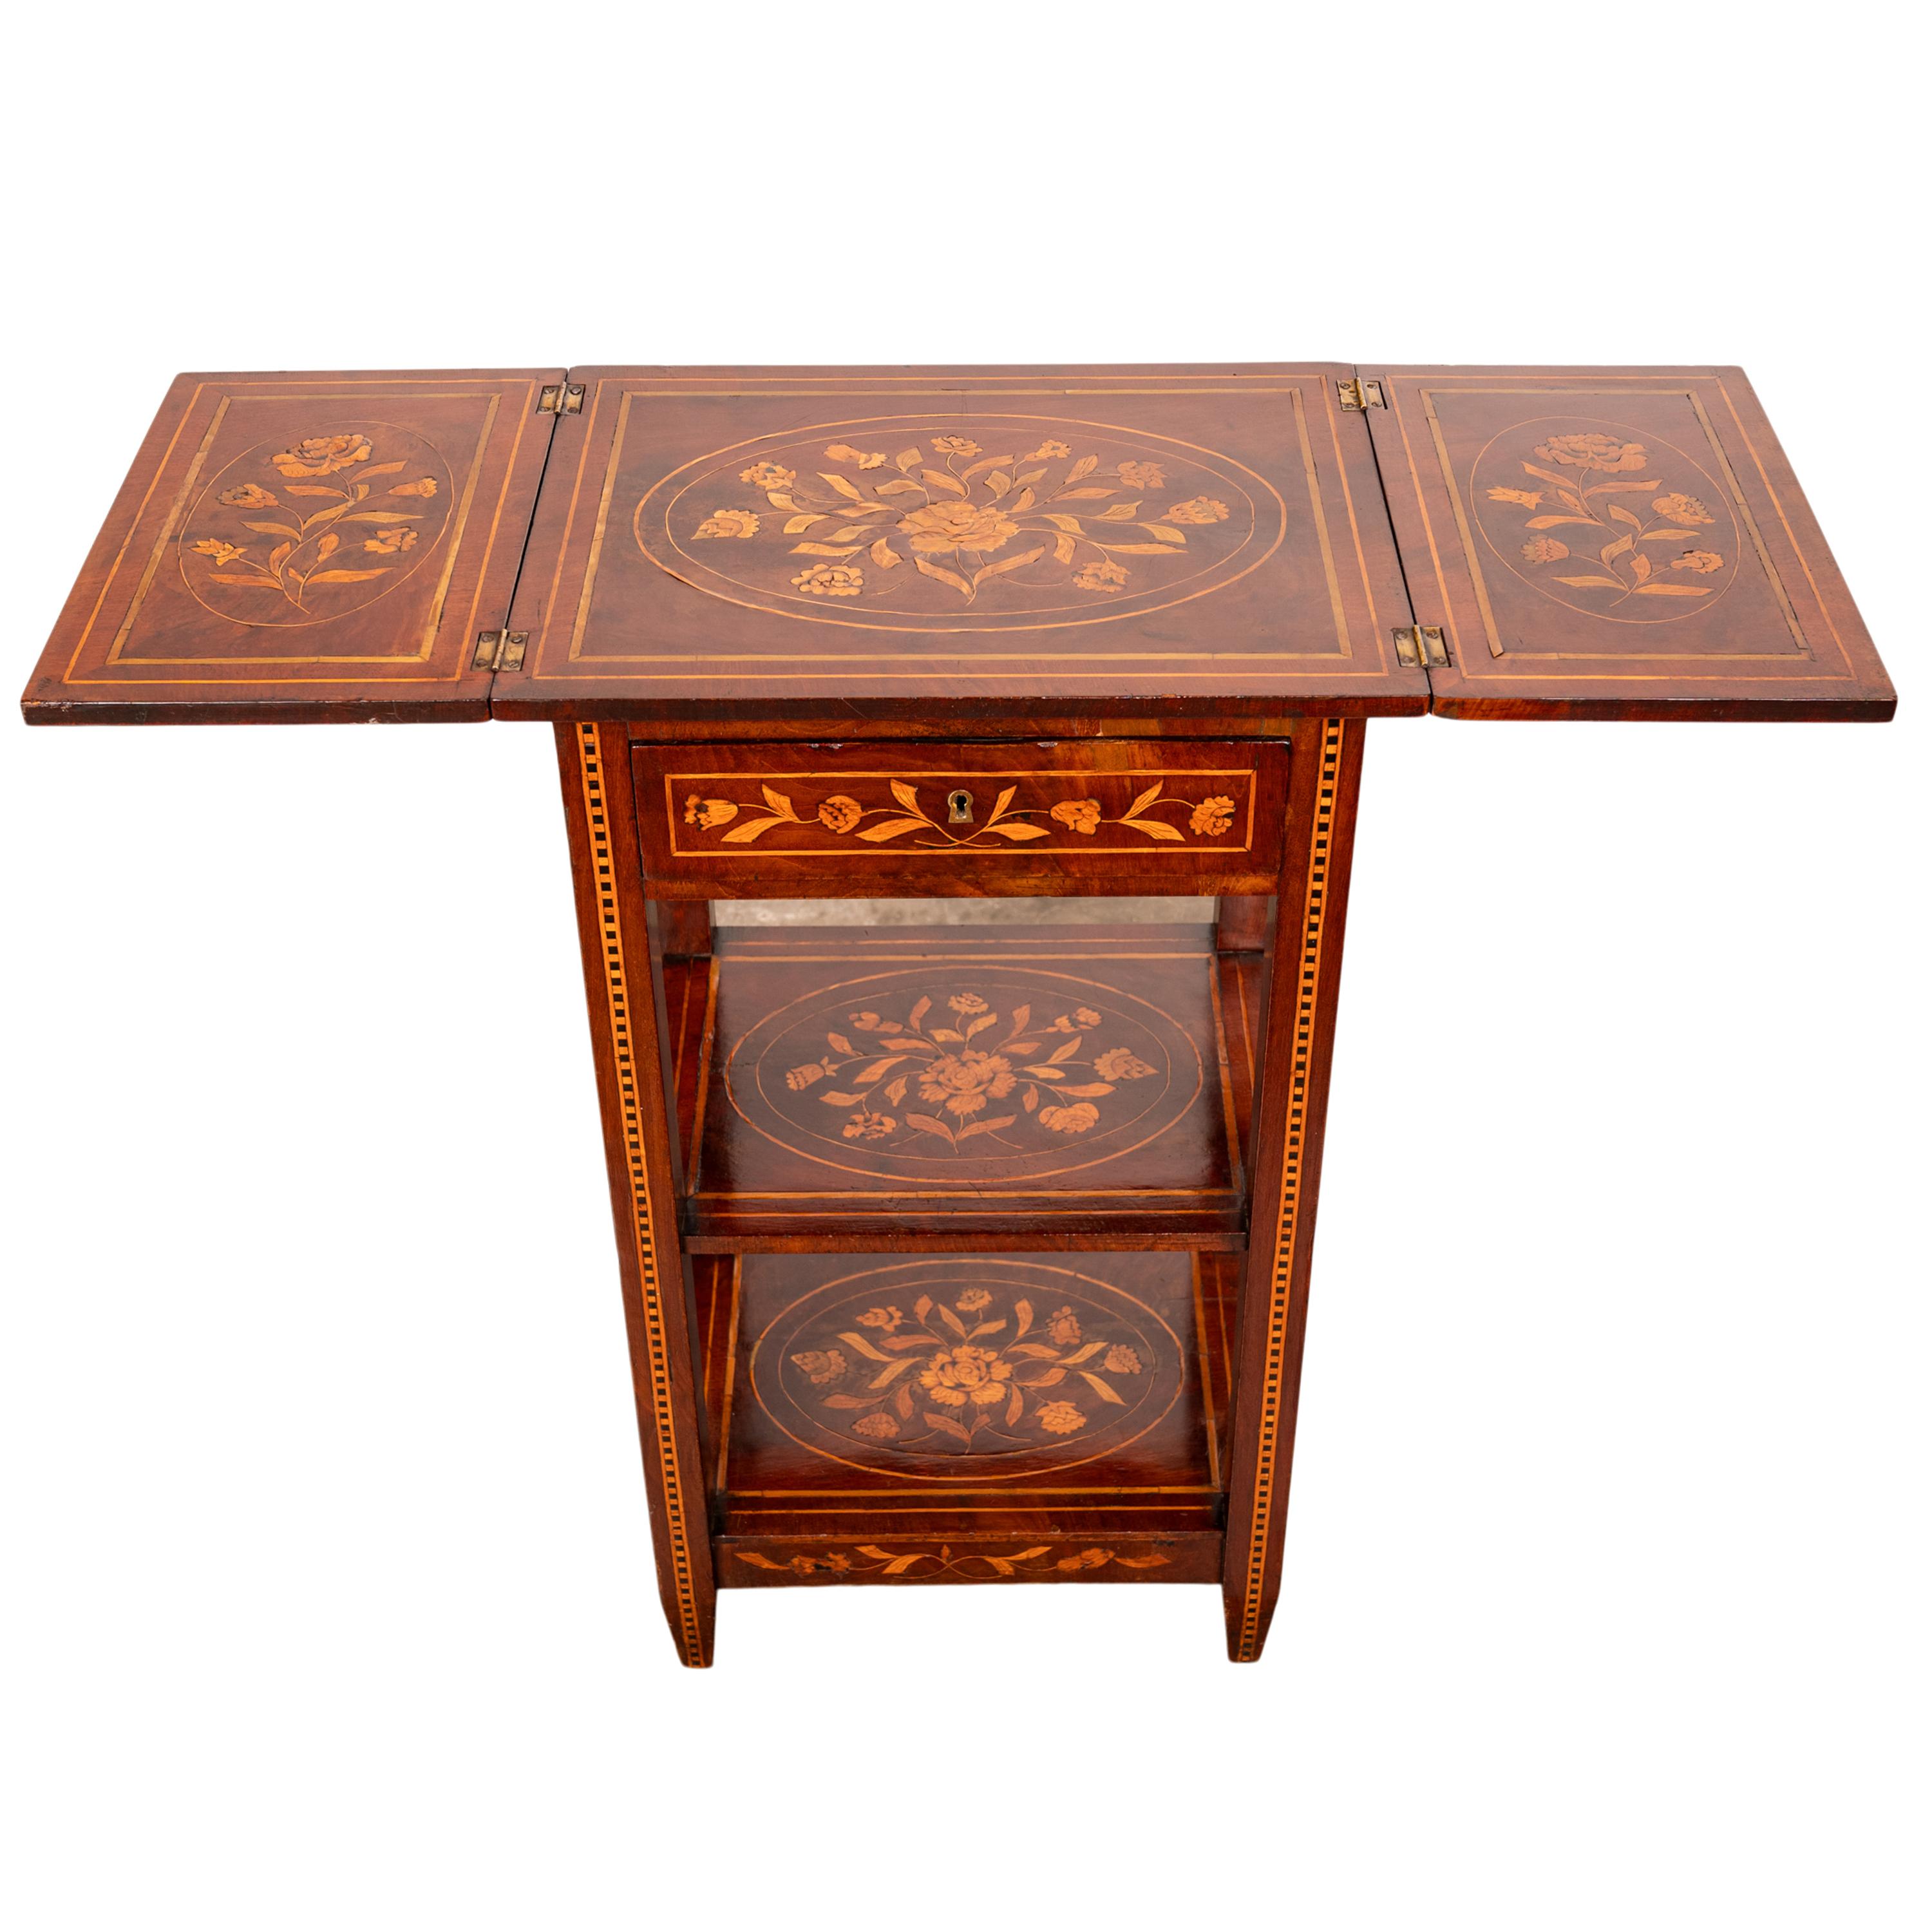 A fine & rare antique rosewood Dutch marquetry side table, etagere, circa 1820.
This very elegant & rare table/etagere having a fold out top, the leaves when closed have sumptuous marquetry inlaid with twin flowering urns with caryatids & bordered